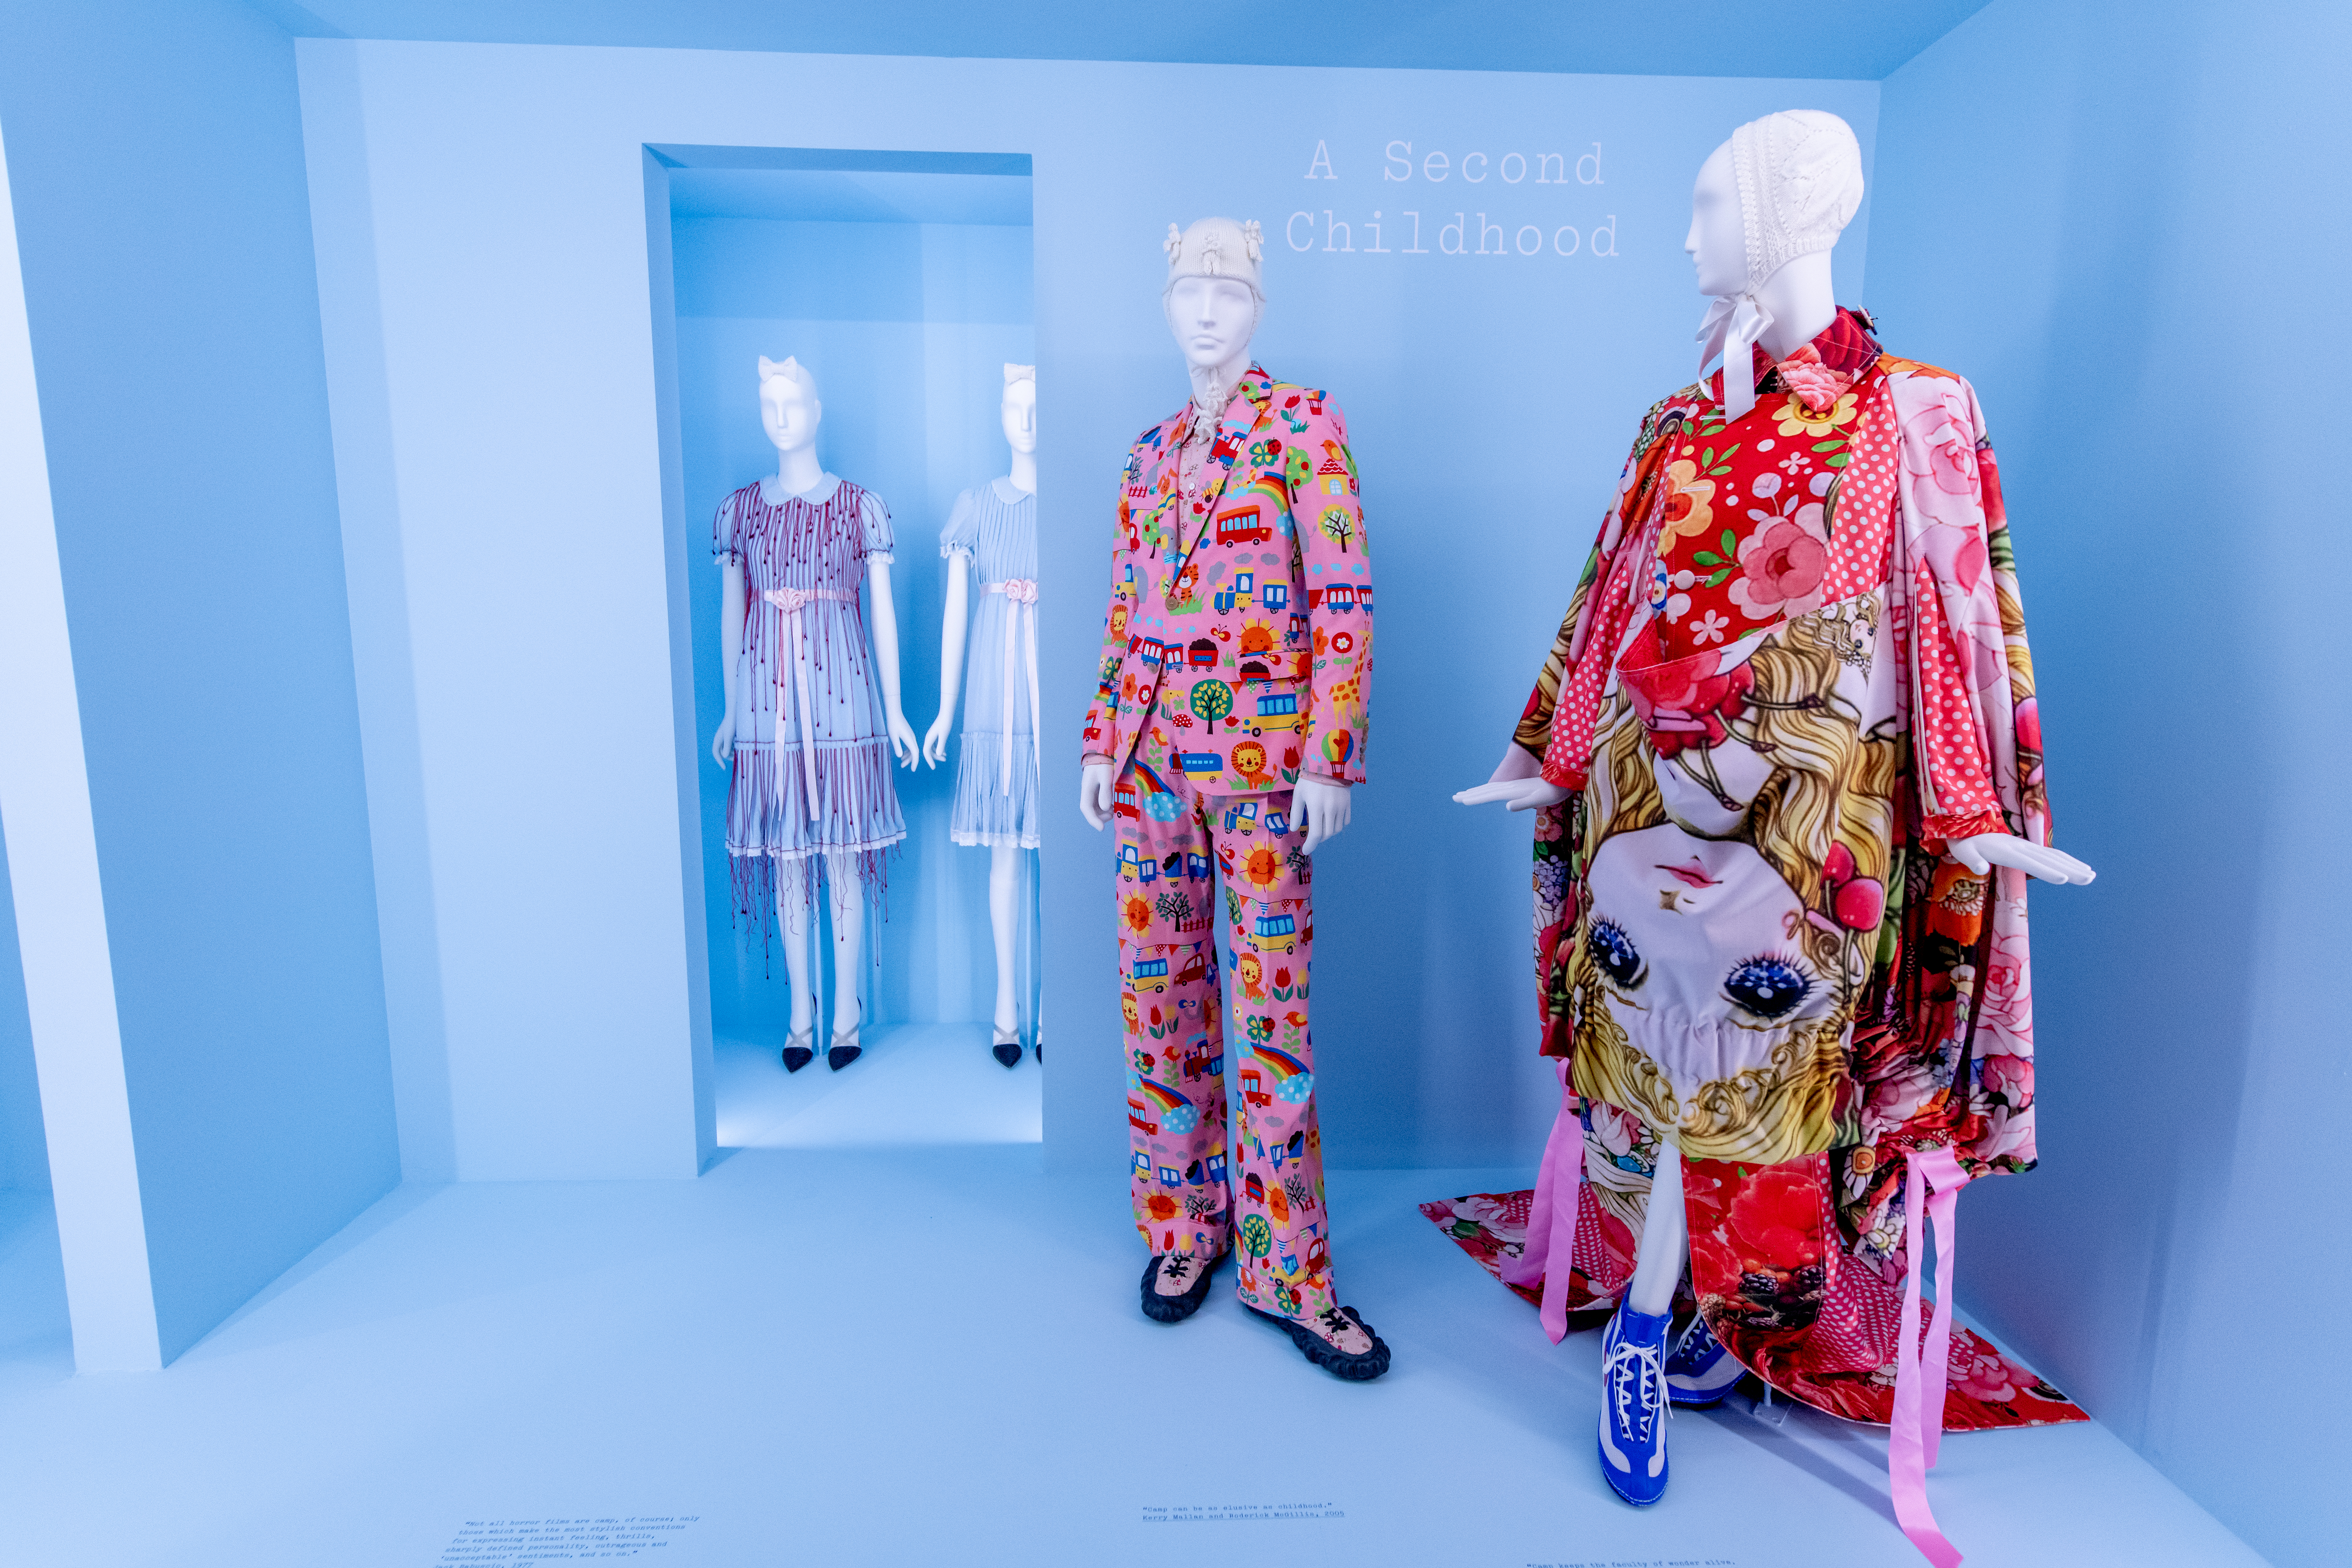 NEW YORK, NEW YORK - MAY 06: General Atmosphere during Notes On Fashion - Press Preview at The Metropolitan Museum of Art on May 06, 2019 in New York City. (Photo by Roy Rochlin/Getty Images)